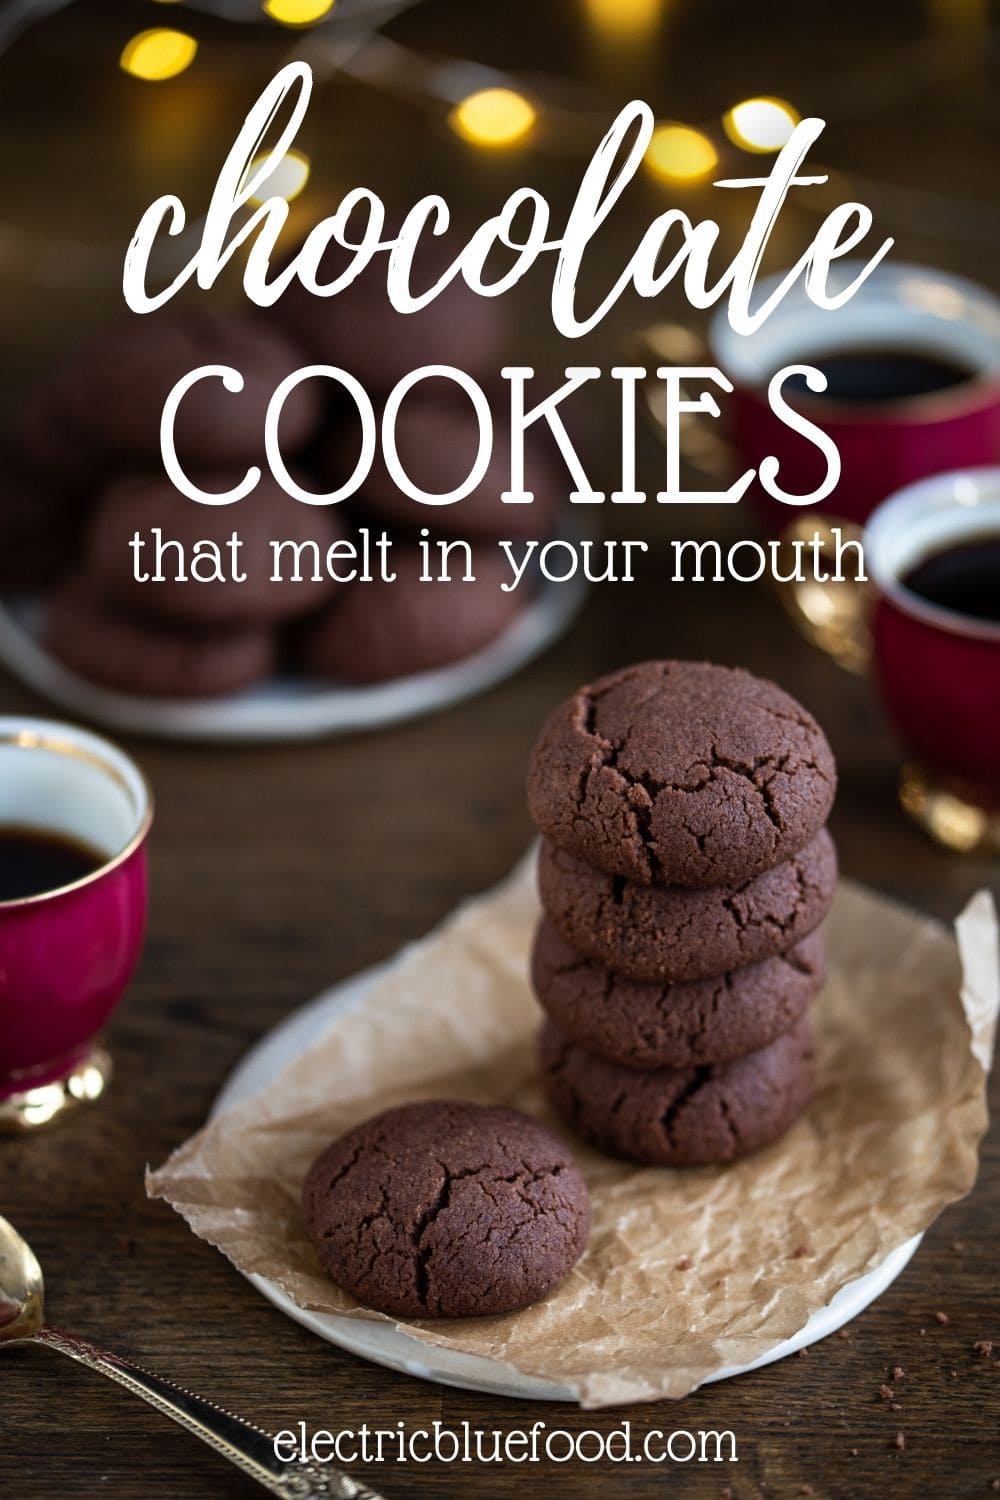 Chocolate butter cookies that melt in your mouth with the most magical texture. They are crumbly and melty and have an intense cocoa and butter flavour.